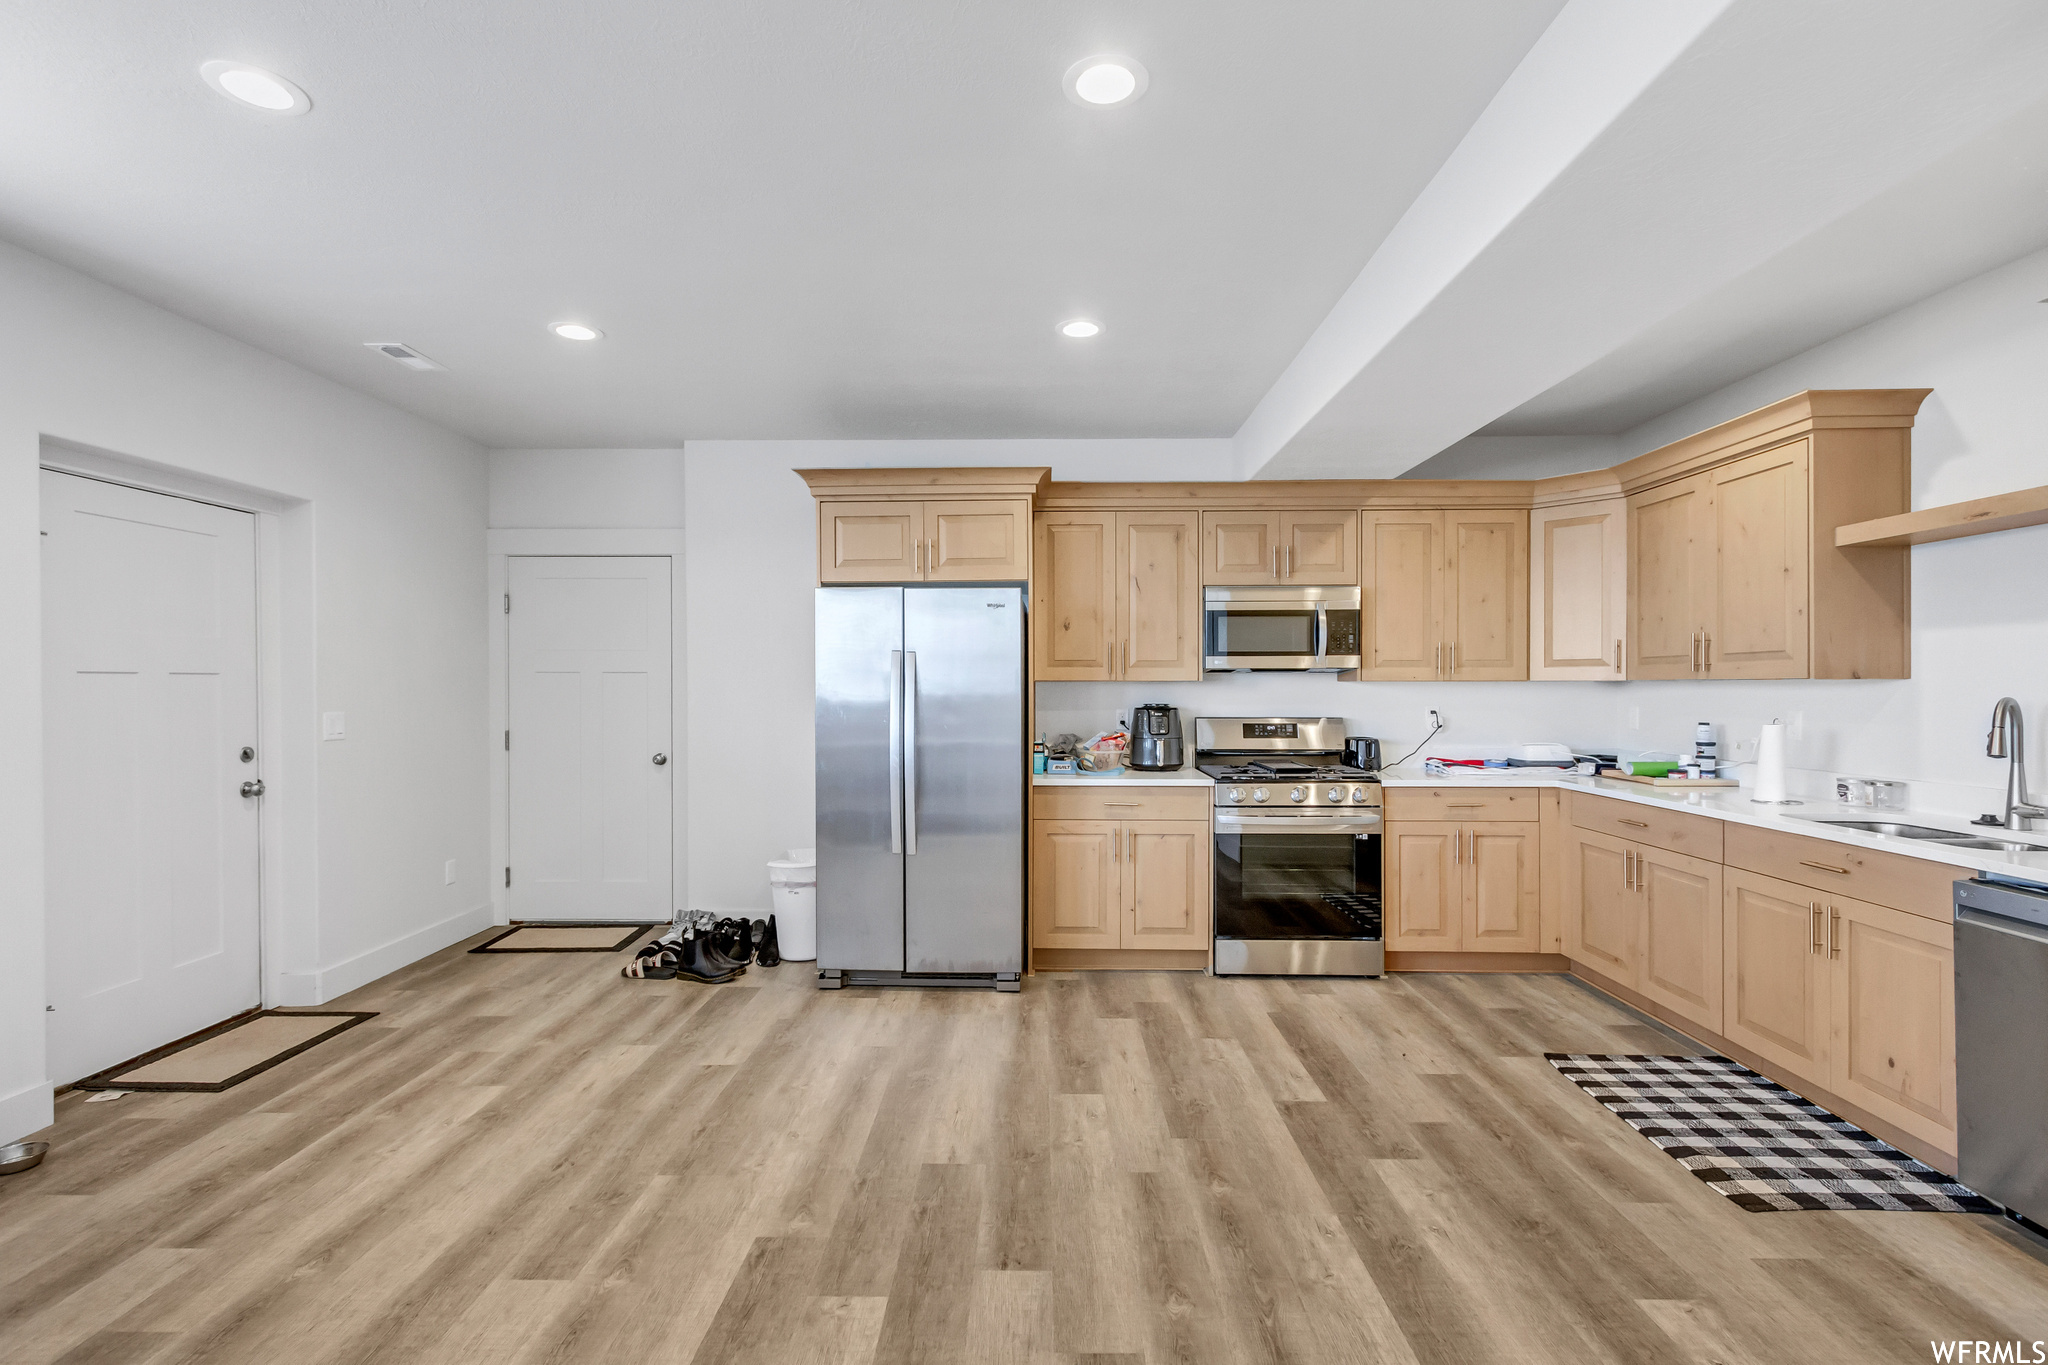 Kitchen with light brown cabinets, sink, appliances with stainless steel finishes, and light hardwood / wood-style floors